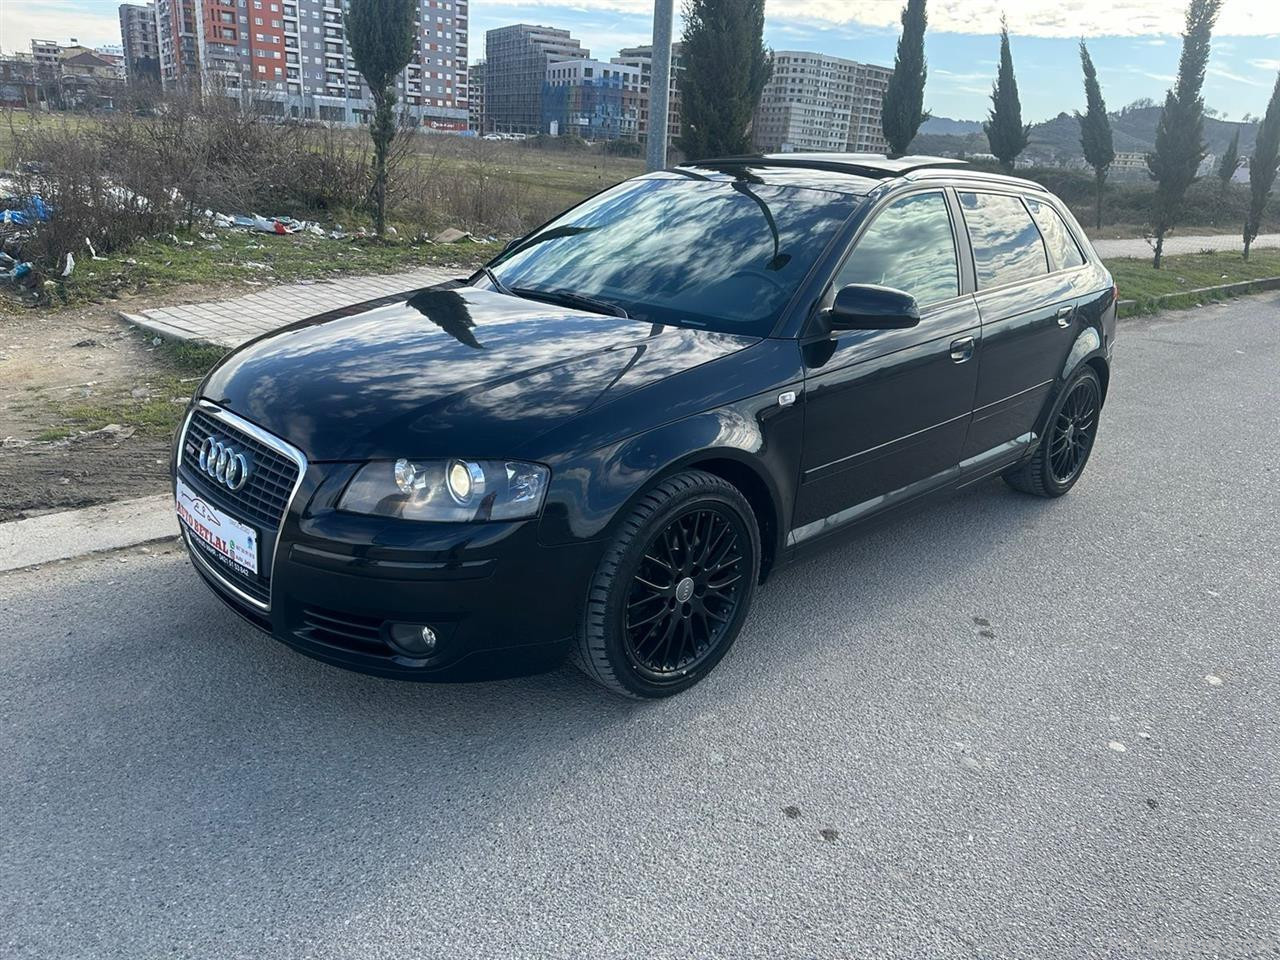 SHITET AUDI A3 S LINE PANORAM AUTOMAT FULL OPSION 